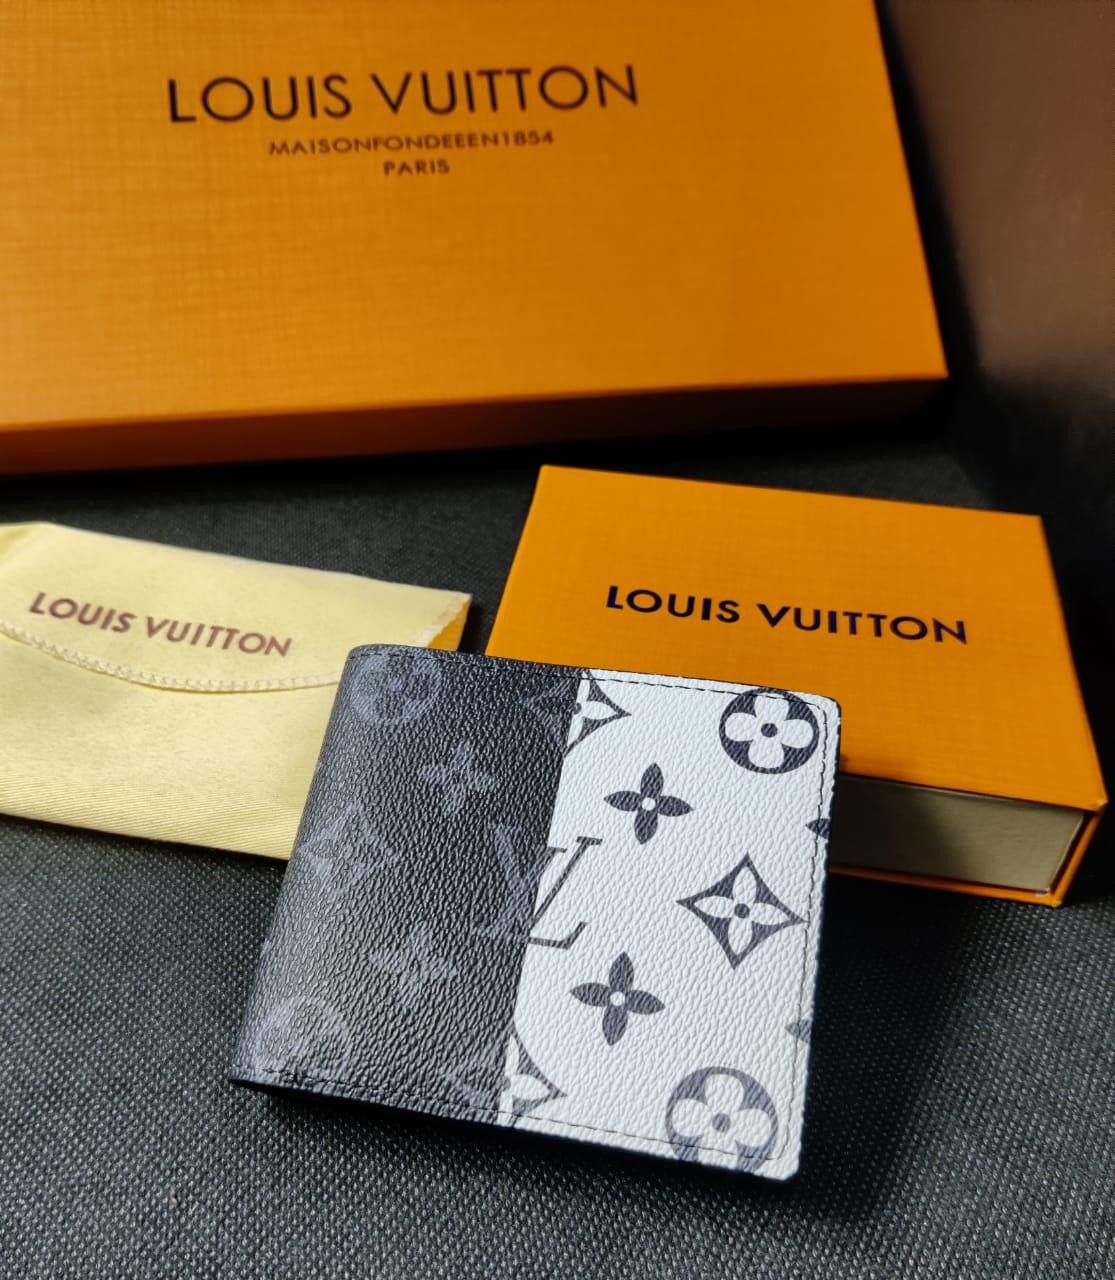 Louis Vuitton Leather Heavy quality latest full printed Black and White Color design Fancy look wallet for men's LV-705